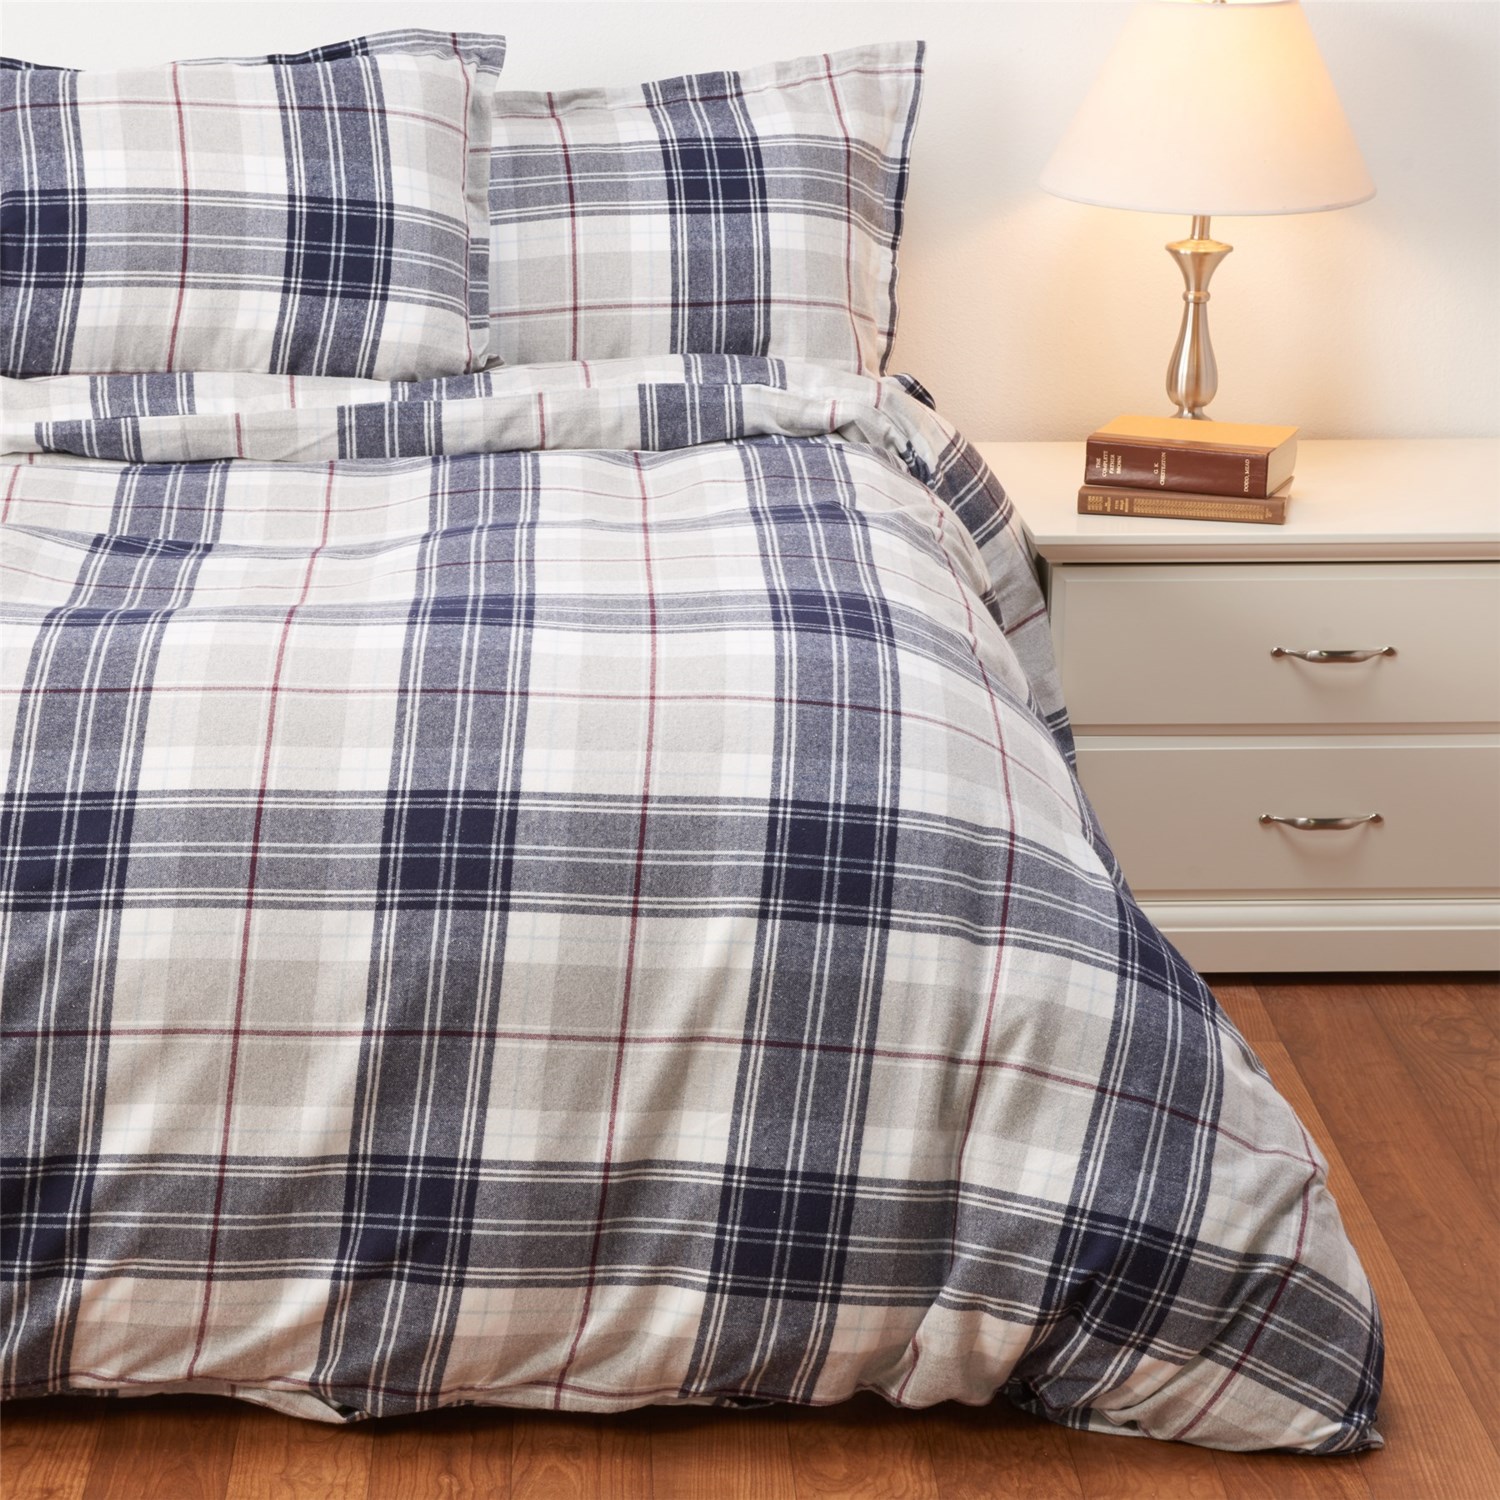 Peacock Alley Made In Portugal Plaid Cotton Flannel Duvet Set